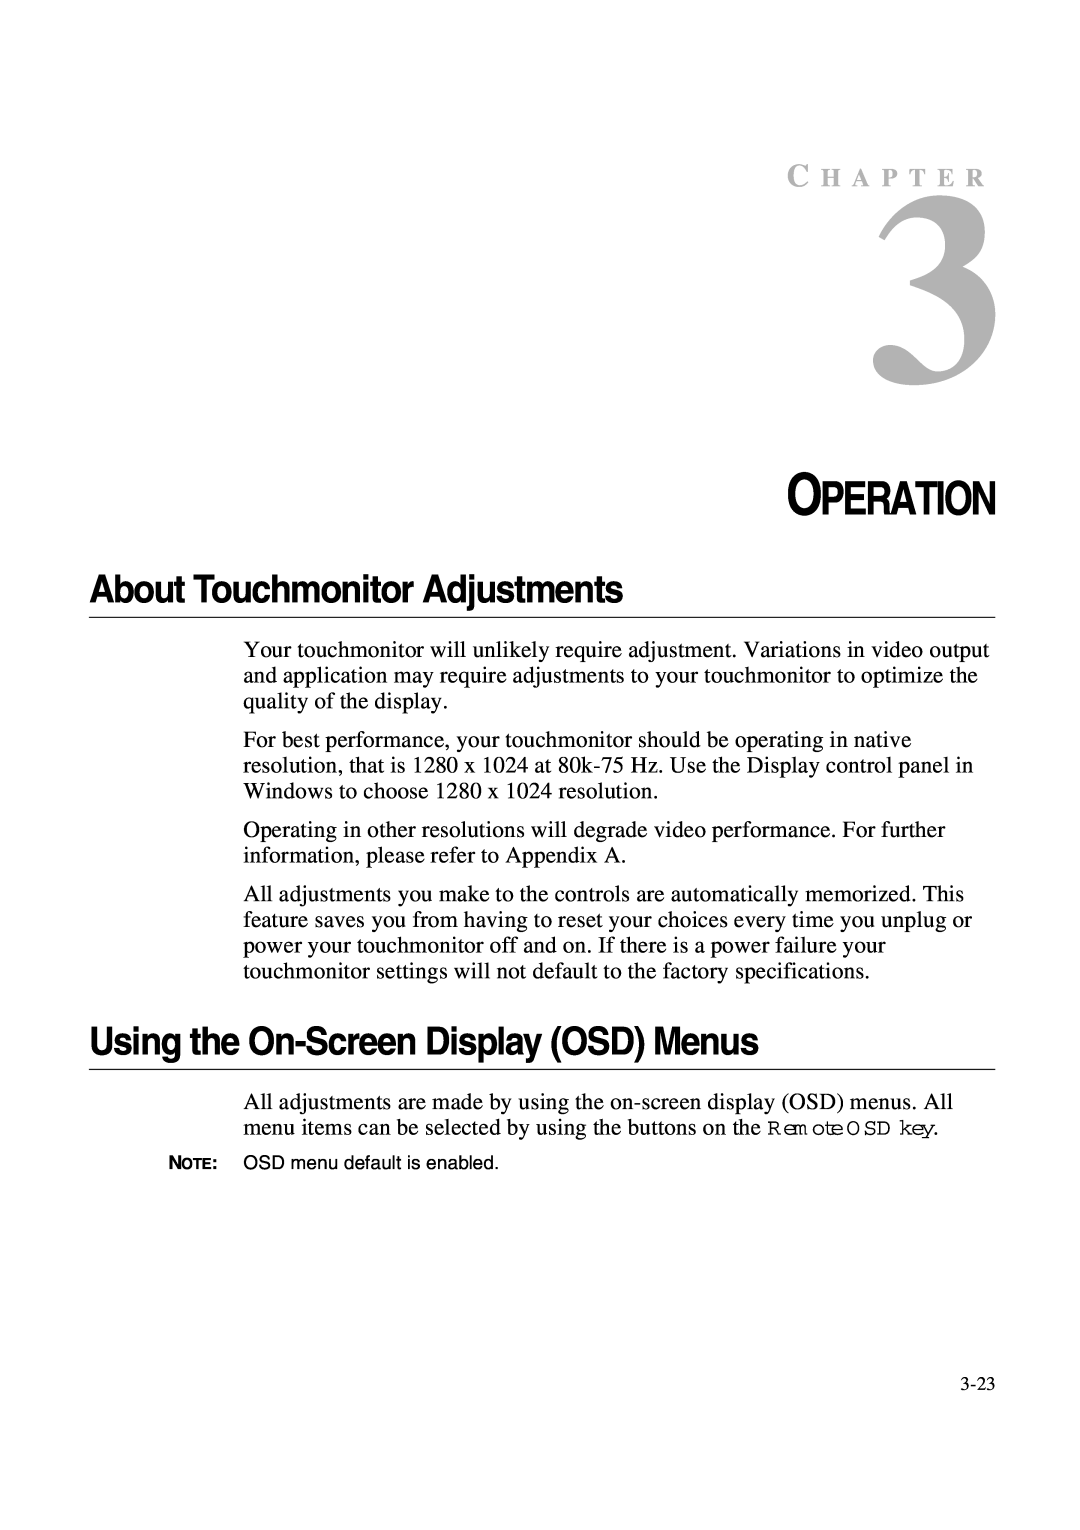 Tyco 1847L Series manual Operation, About Touchmonitor Adjustments, Using the On-Screen Display OSD Menus, C H A P T E R 